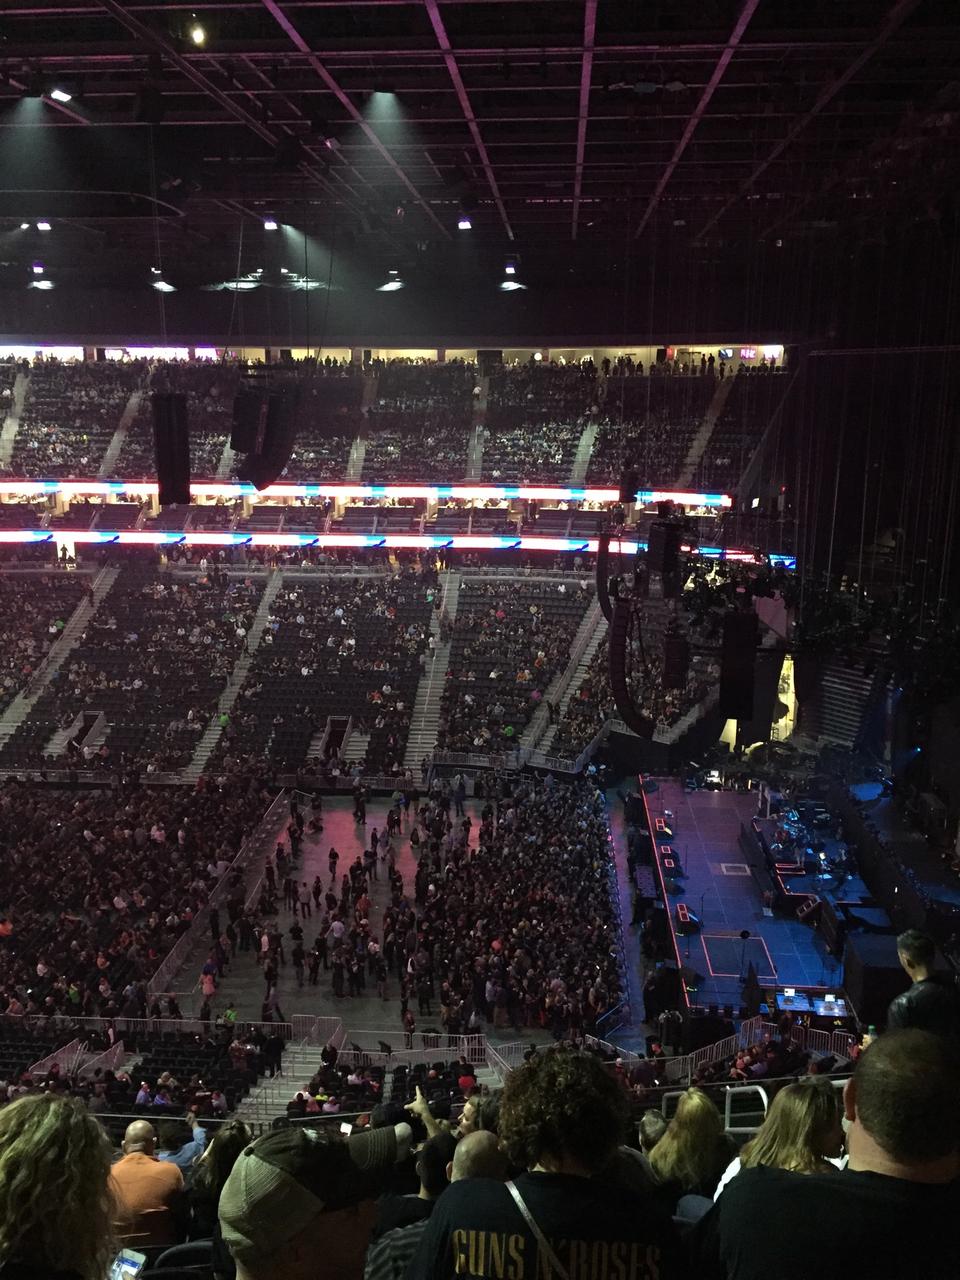 T-Mobile Arena Section 225 Concert Seating - RateYourSeats.com